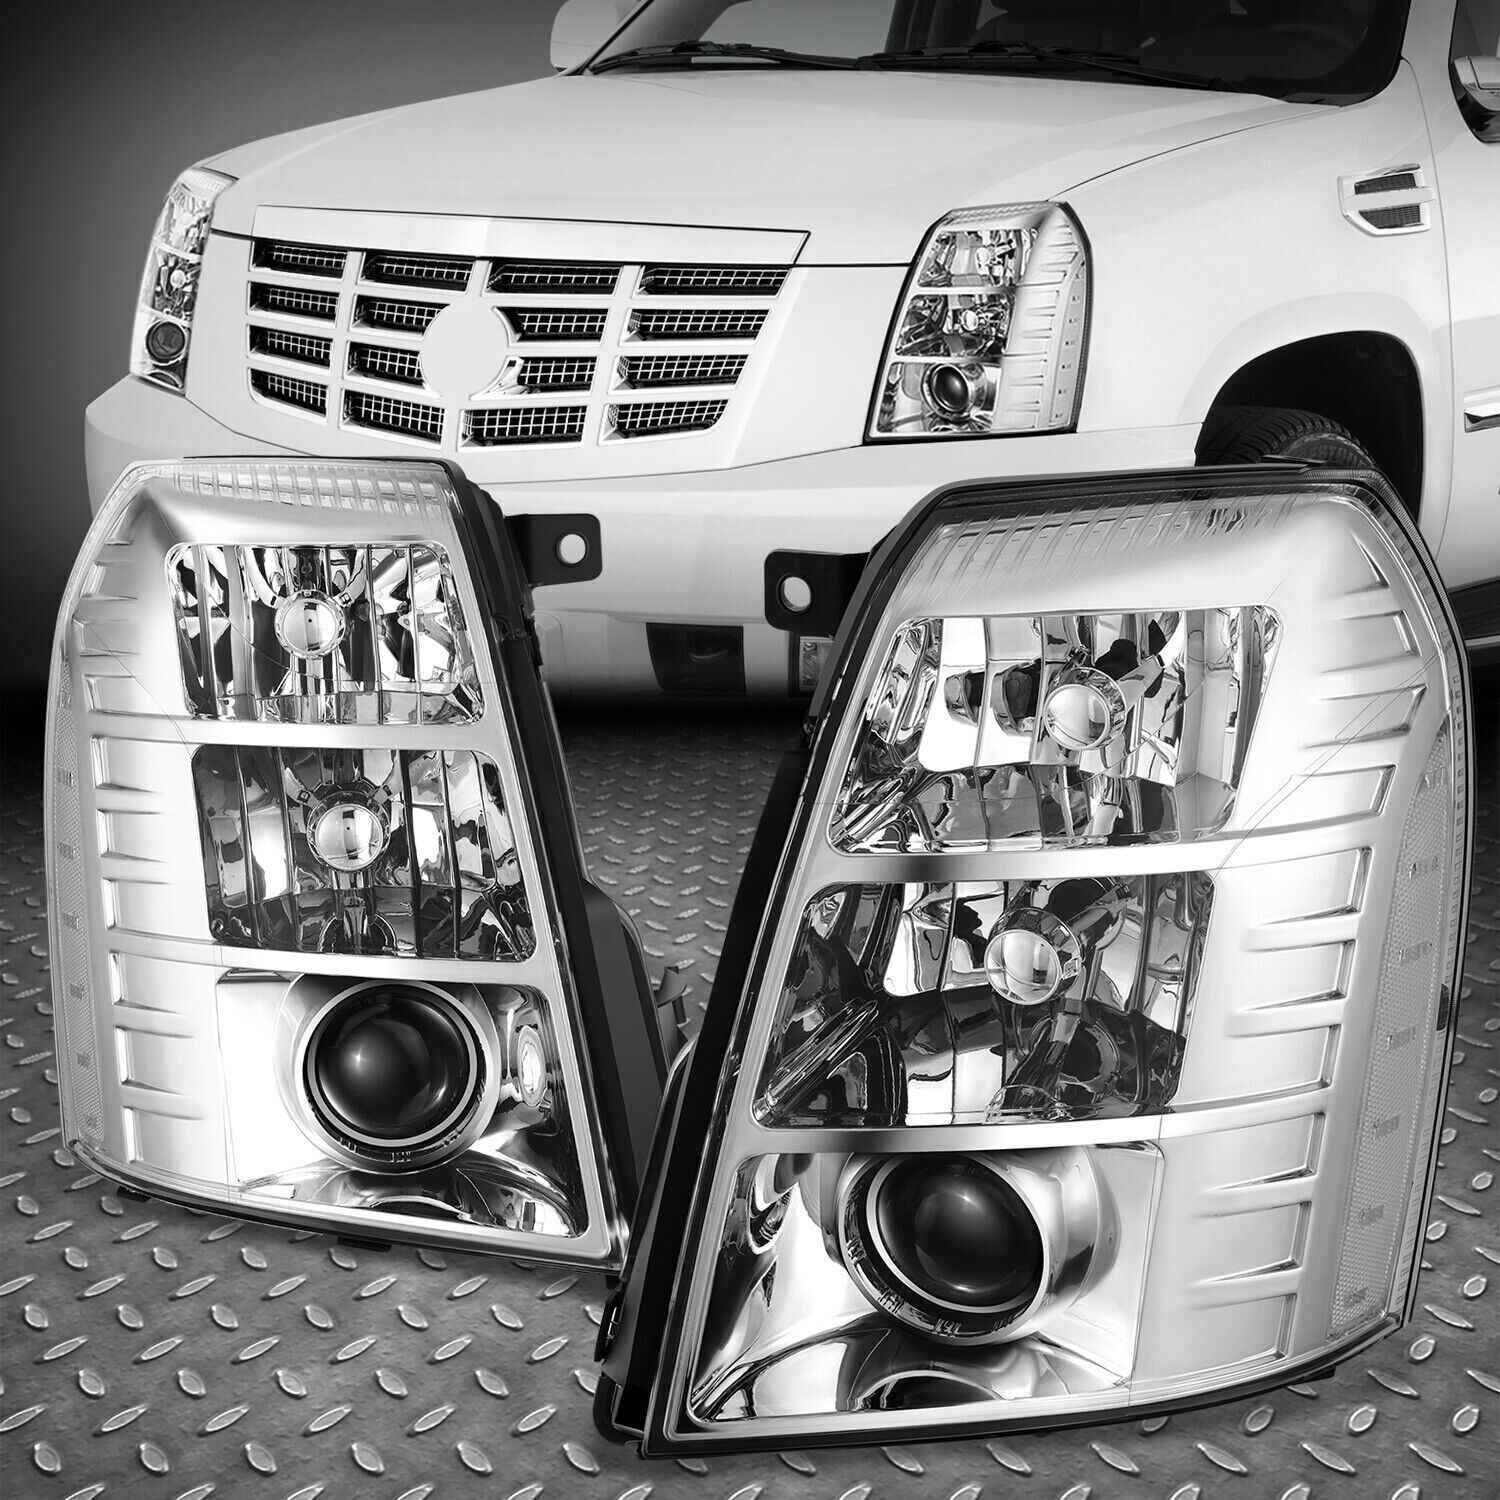 [HID] For 07-14 Cadillac Escalade ESV EXT Projector Headlight Lamps Chrome/Clear